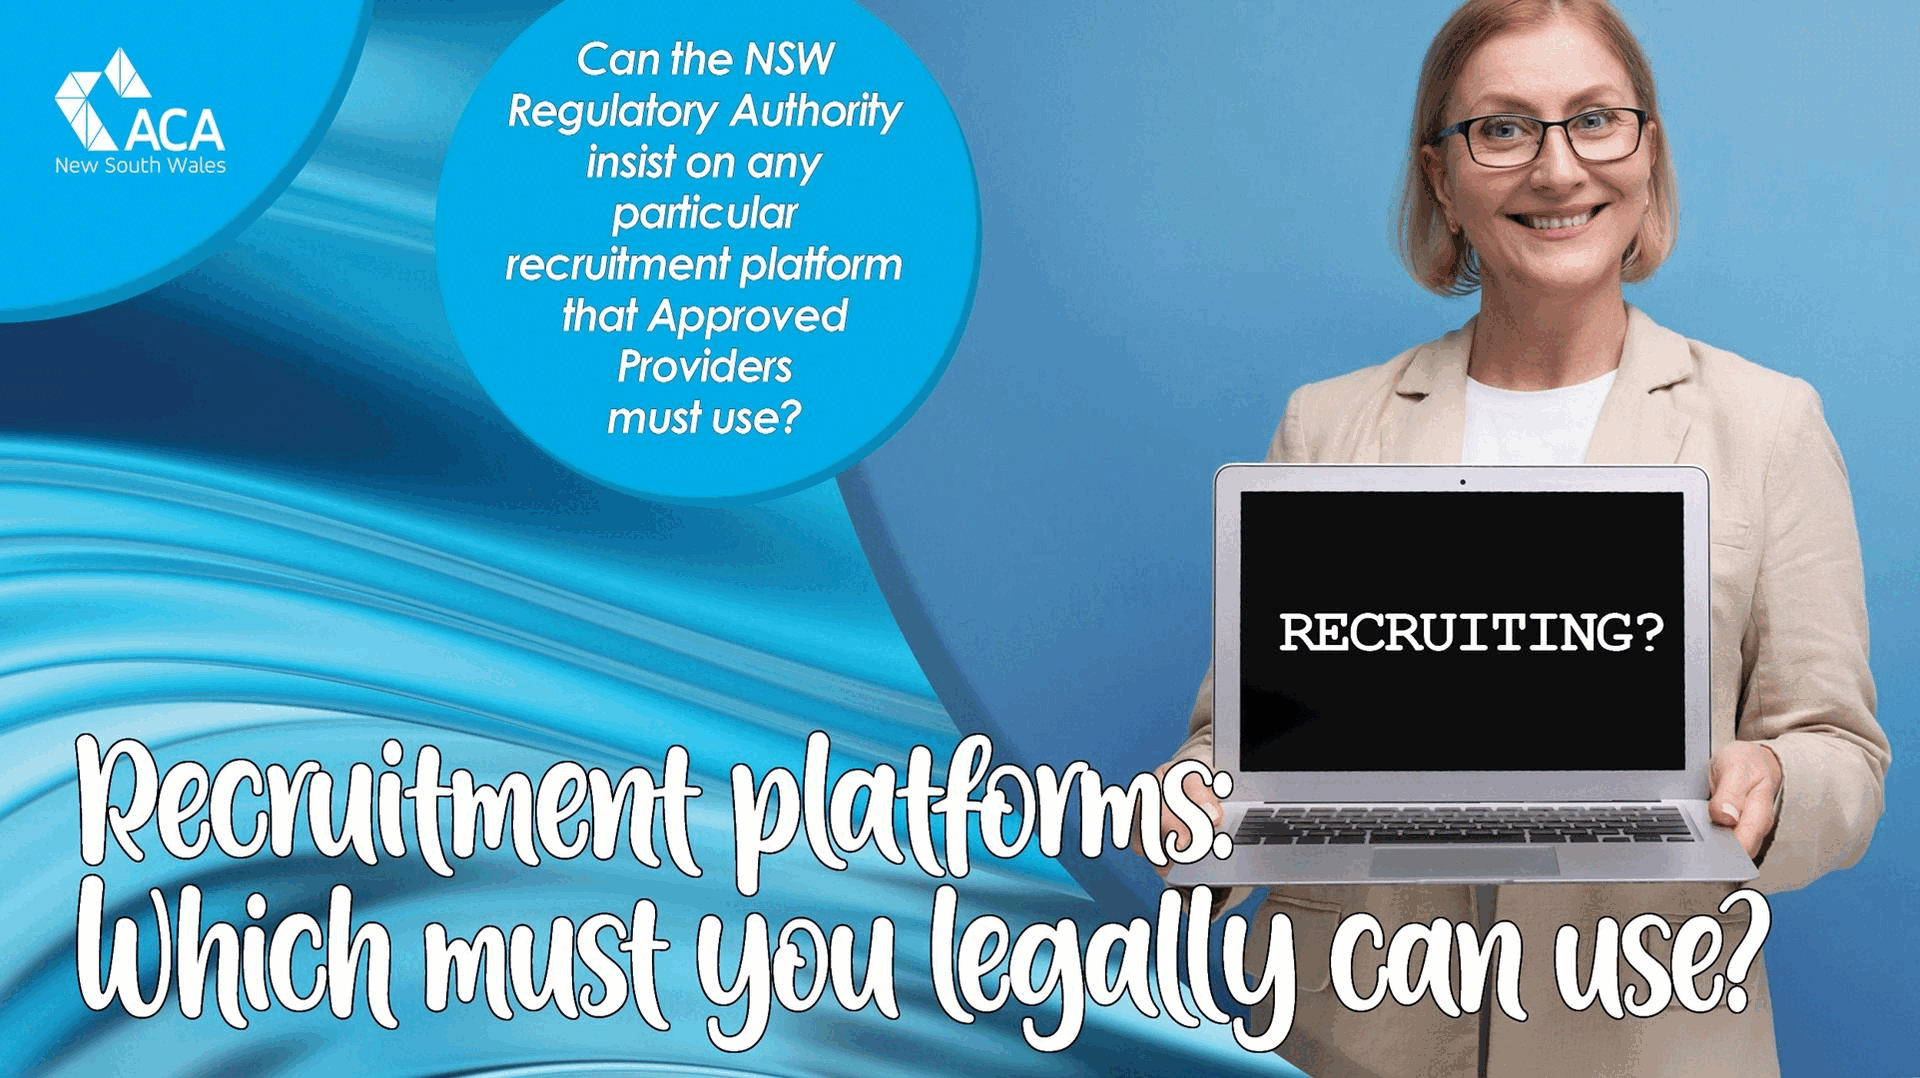 Can the NSW Regulatory Authority insist on any particular recruitment platform that Approved Providers must use?